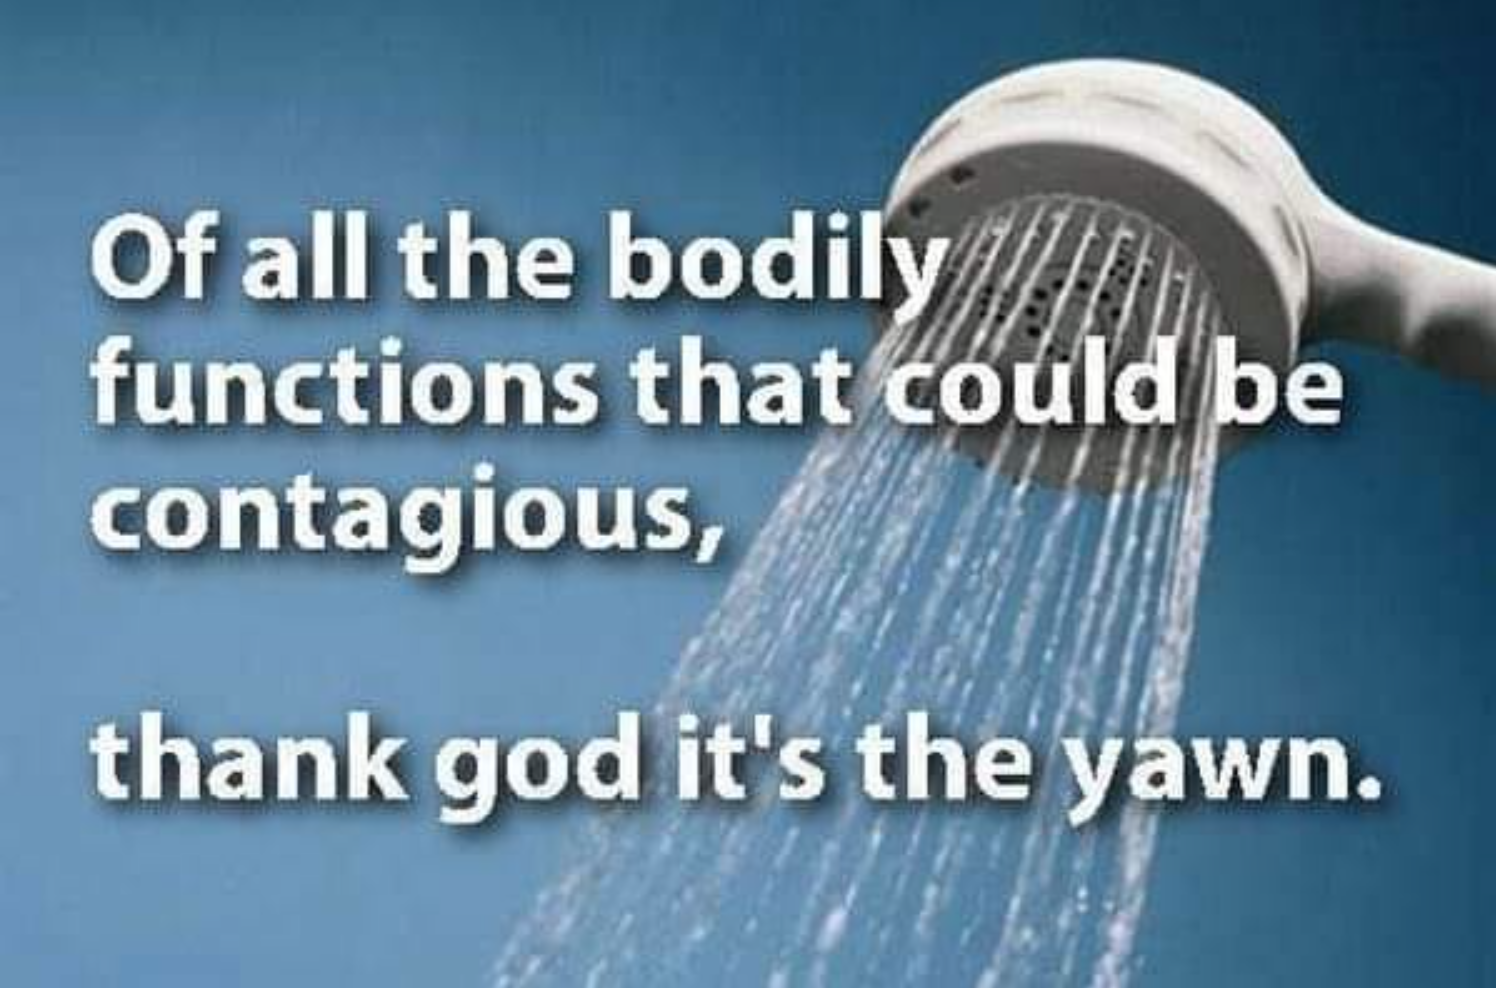 great shower thoughts - Of all the bodily functions that could be contagious, thank god it's the yawn.